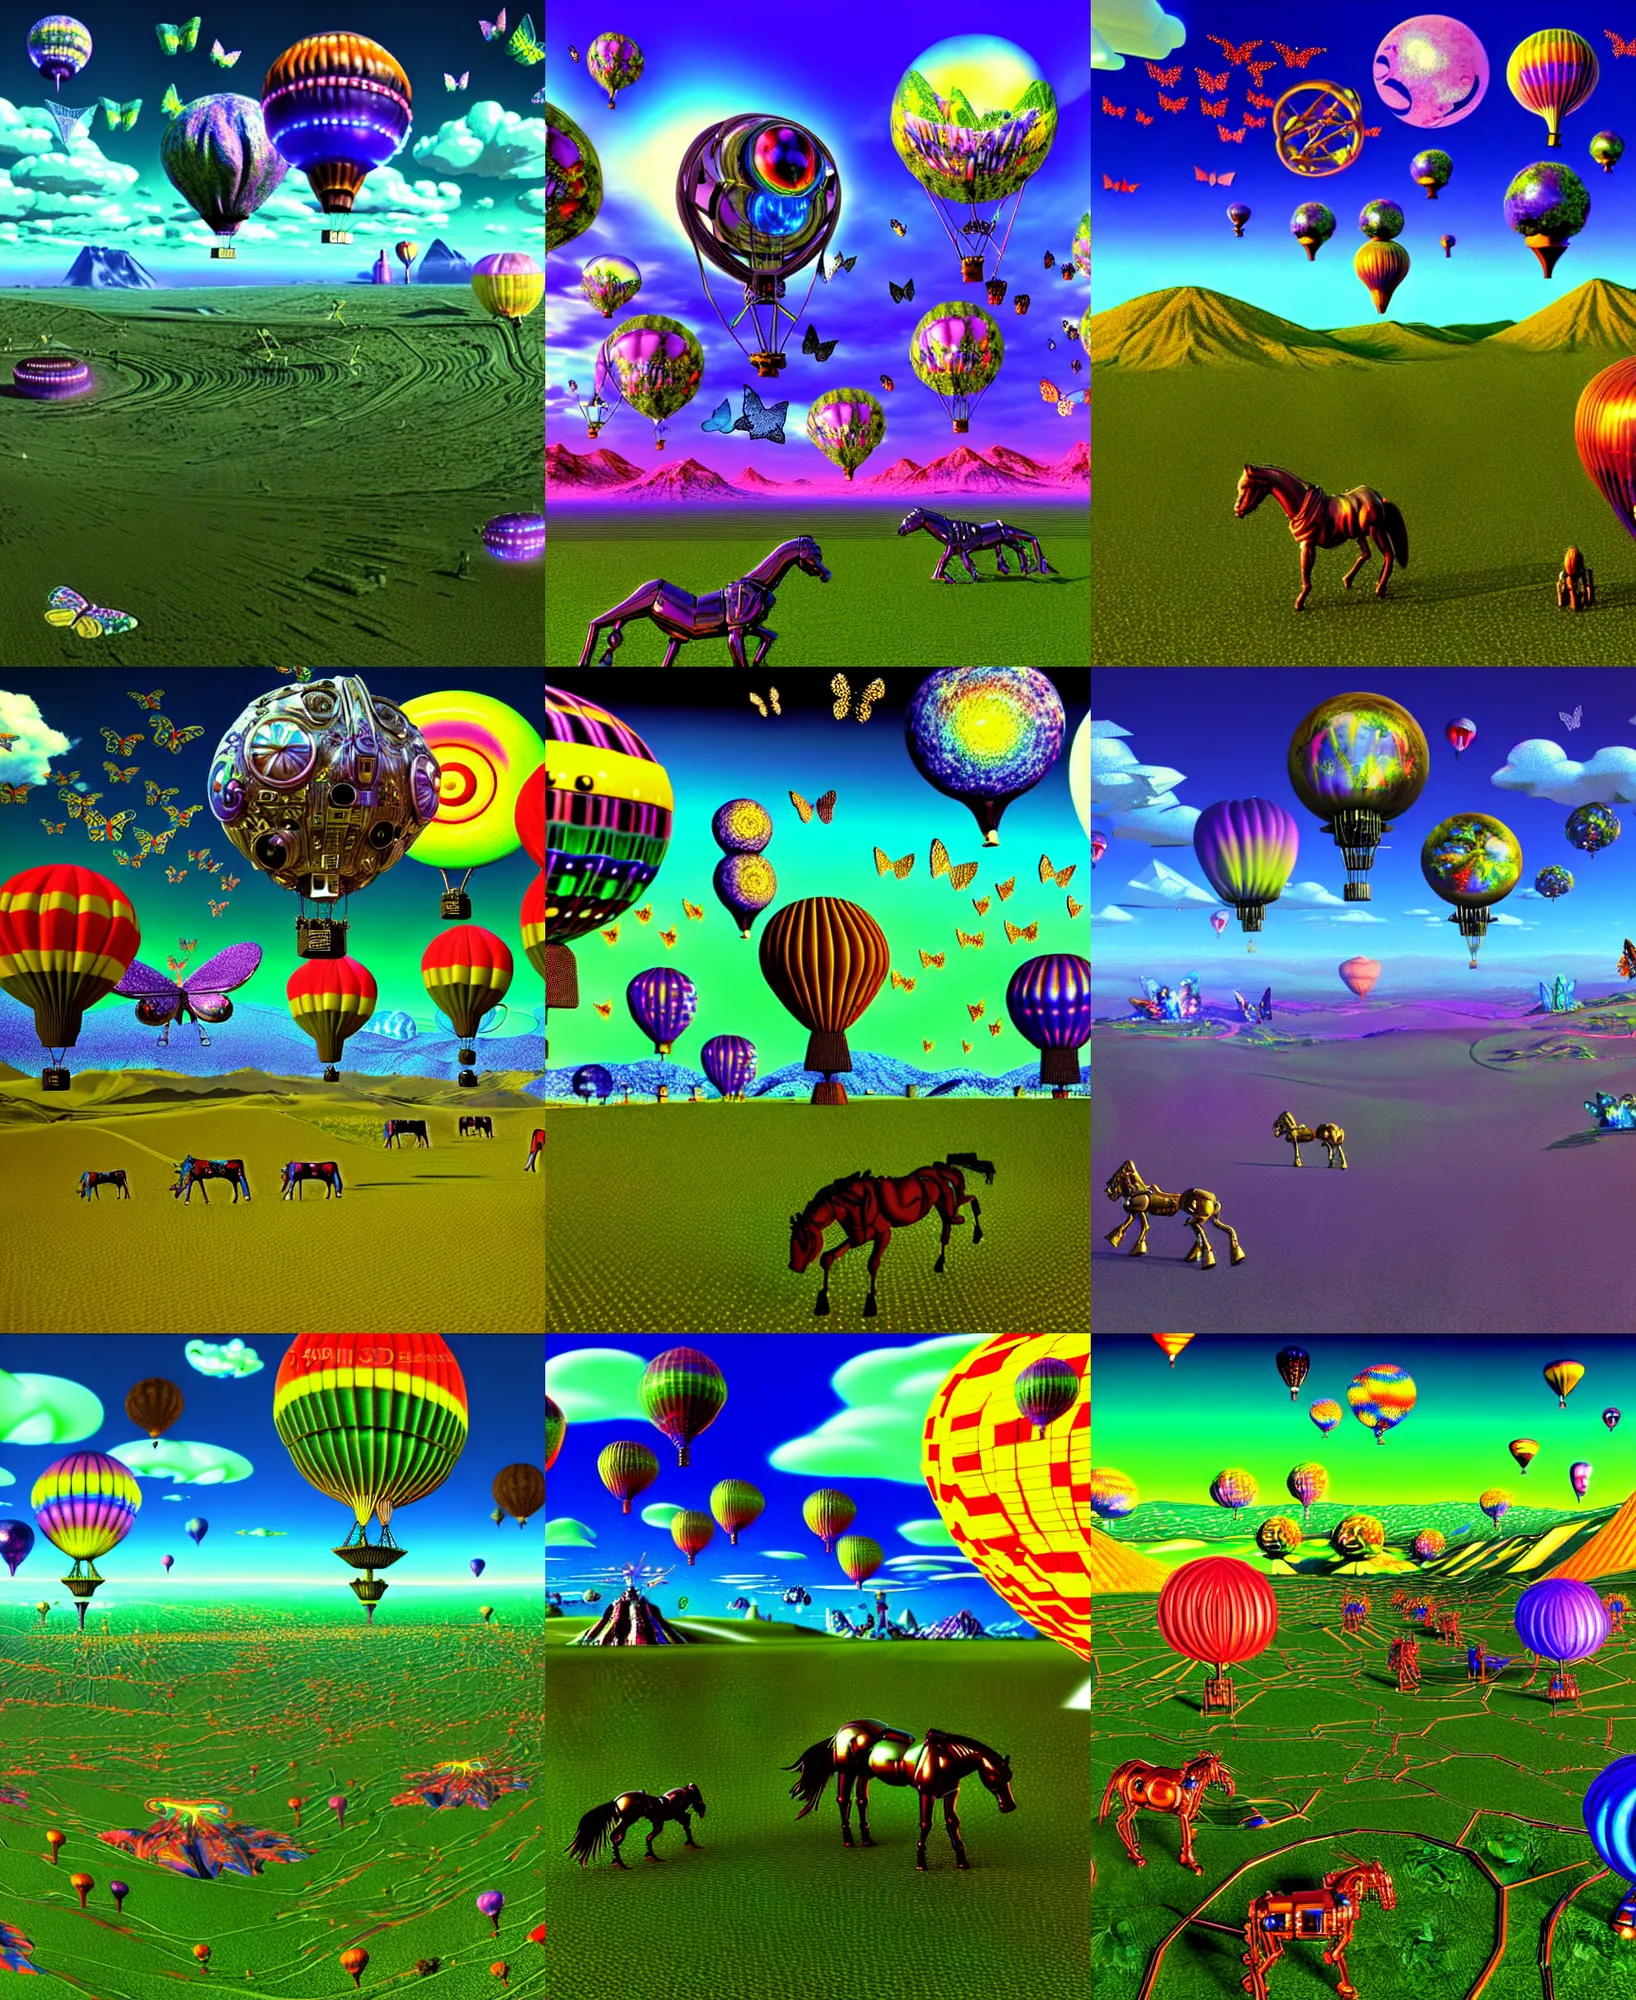 Prompt: 3 d render of cybernetic demoscene landscape with cyborg horses and hot air balloons with angel wings against a psychedelic surreal background with 3 d butterflies and 3 d flowers n the style of 1 9 9 0's demoscene cgi graphics, lsd dream emulator psx, 3 d rendered y 2 k aesthetic by ichiro tanida, 3 do magazine, wide shot